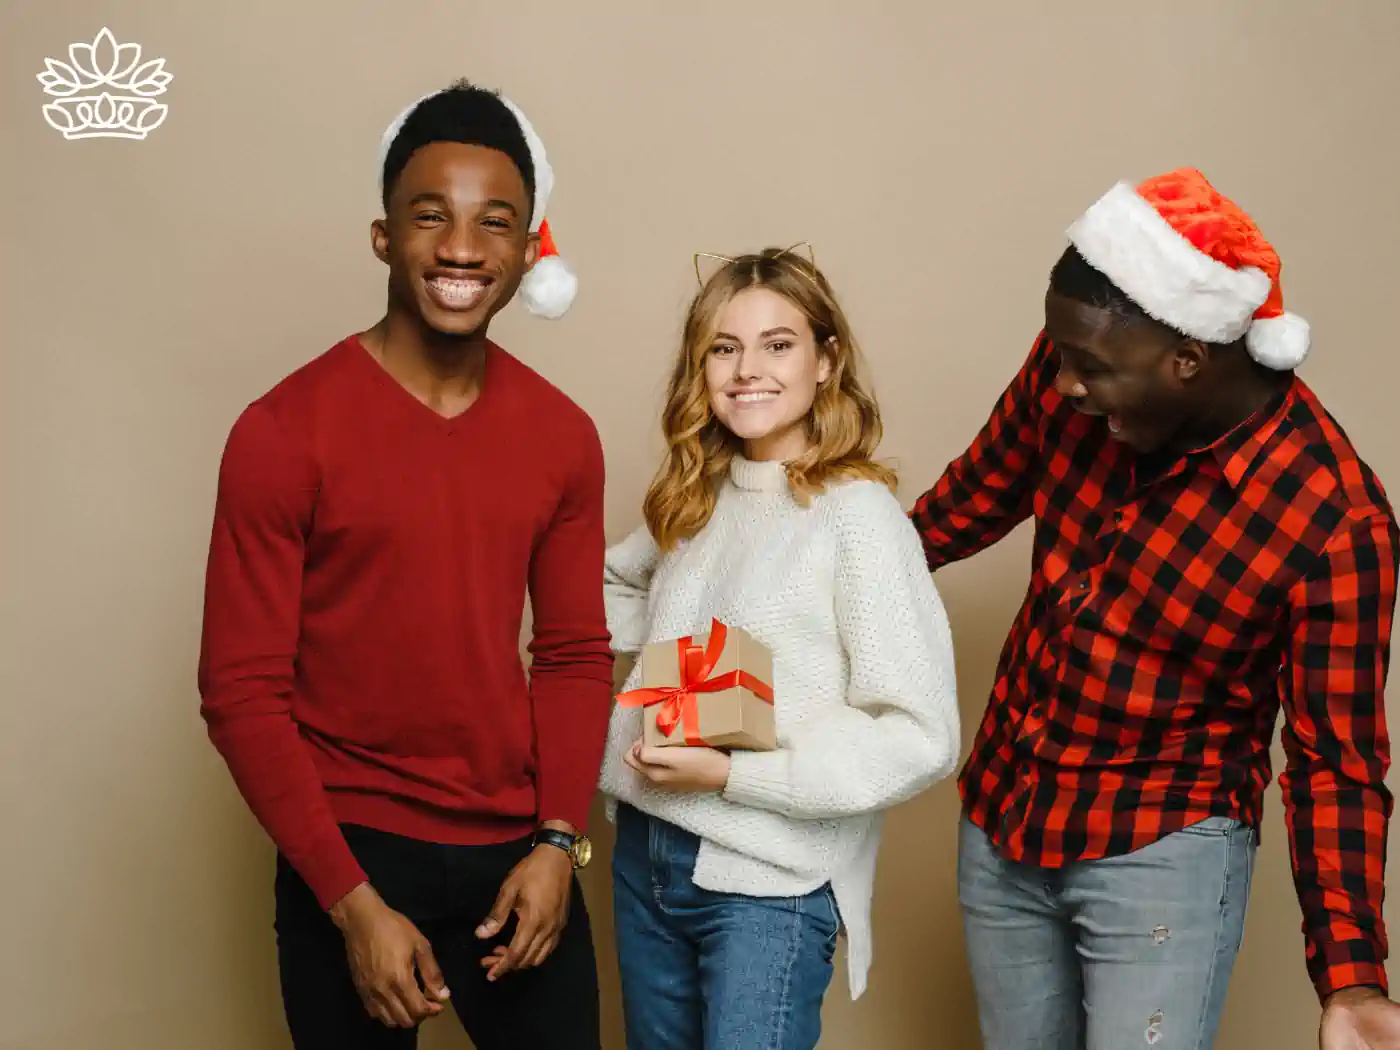 Three friends in festive attire and Santa hats, joyfully posing together, with one holding a gift box wrapped in a red ribbon, part of the Festive Season Gift Boxes Collection. Delivered with Heart by Fabulous Flowers and Gifts.